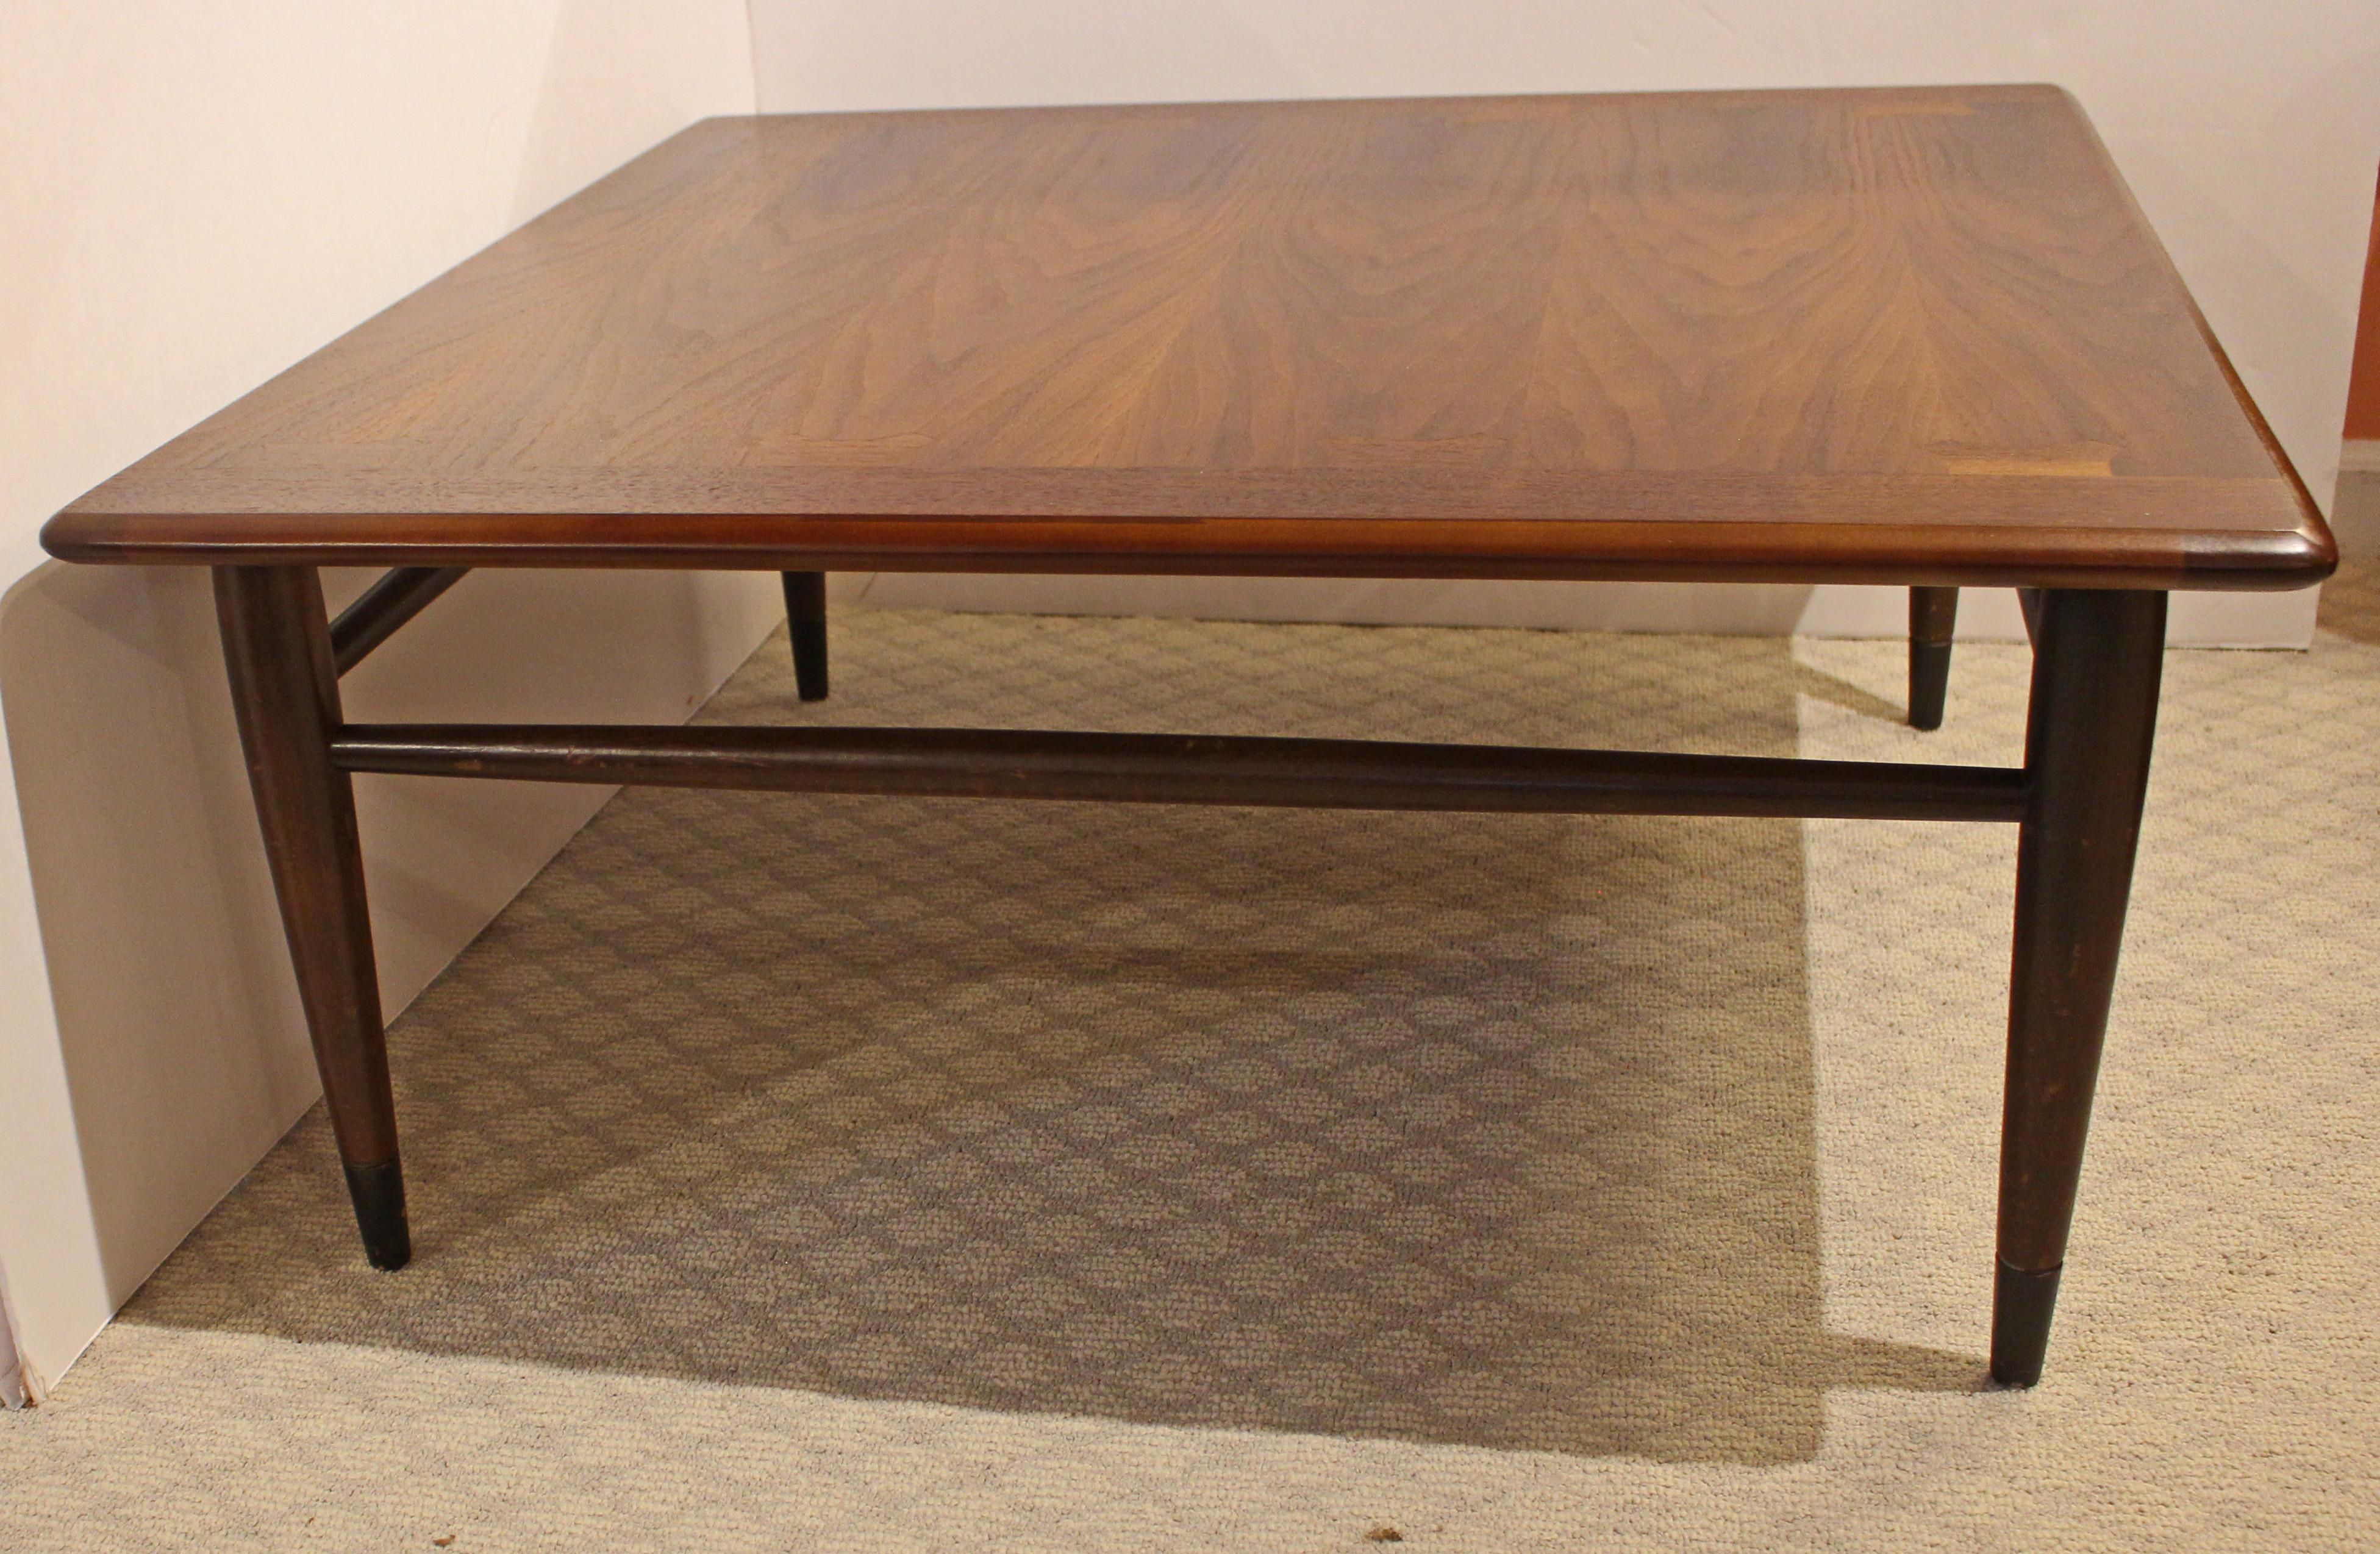 Mid century modern c.1960 square coffee or corner table. Walnut, raised on classic turned, tapered bronze metal capped legs. Stunning walnut selection on top veneers. Inlay plays on Acclaim line by Lane, possibly a small run preceding the Acclaim